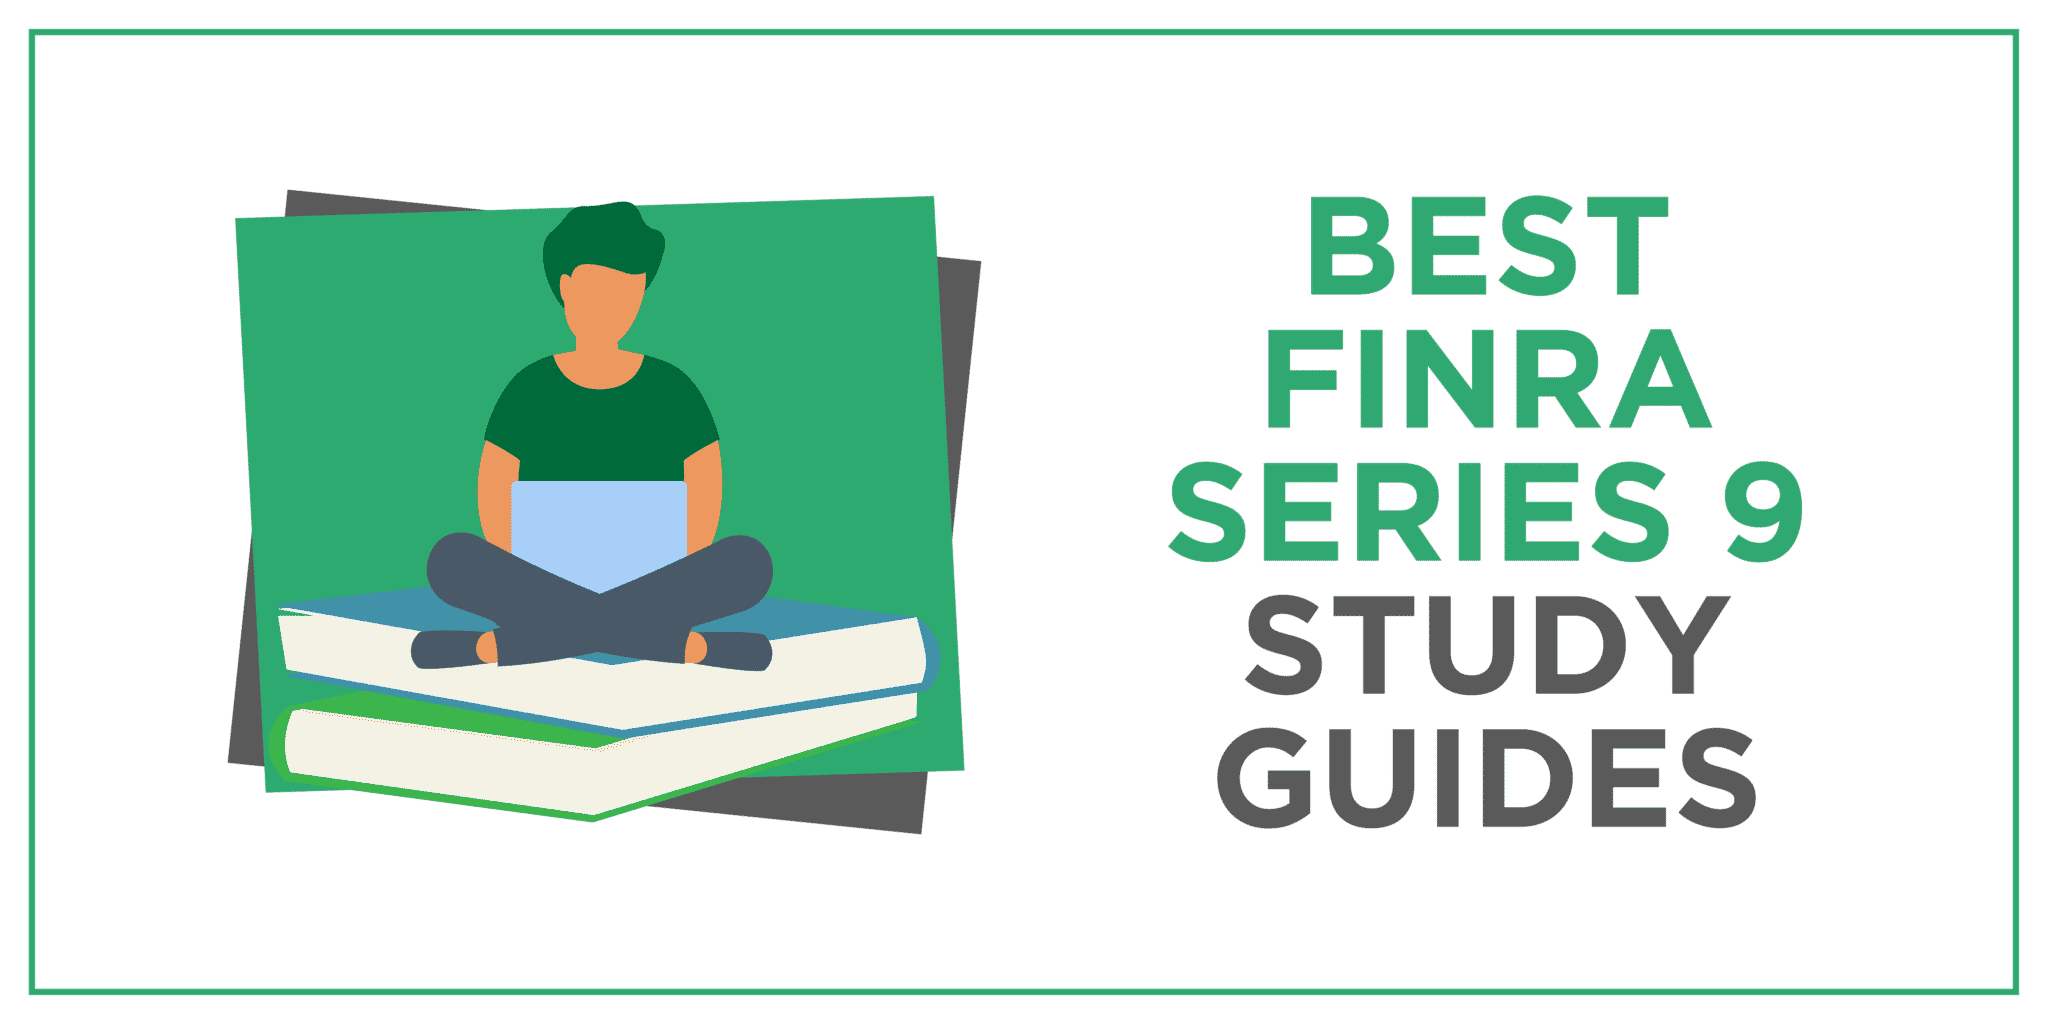 Best FINRA Series 9 Study Guides